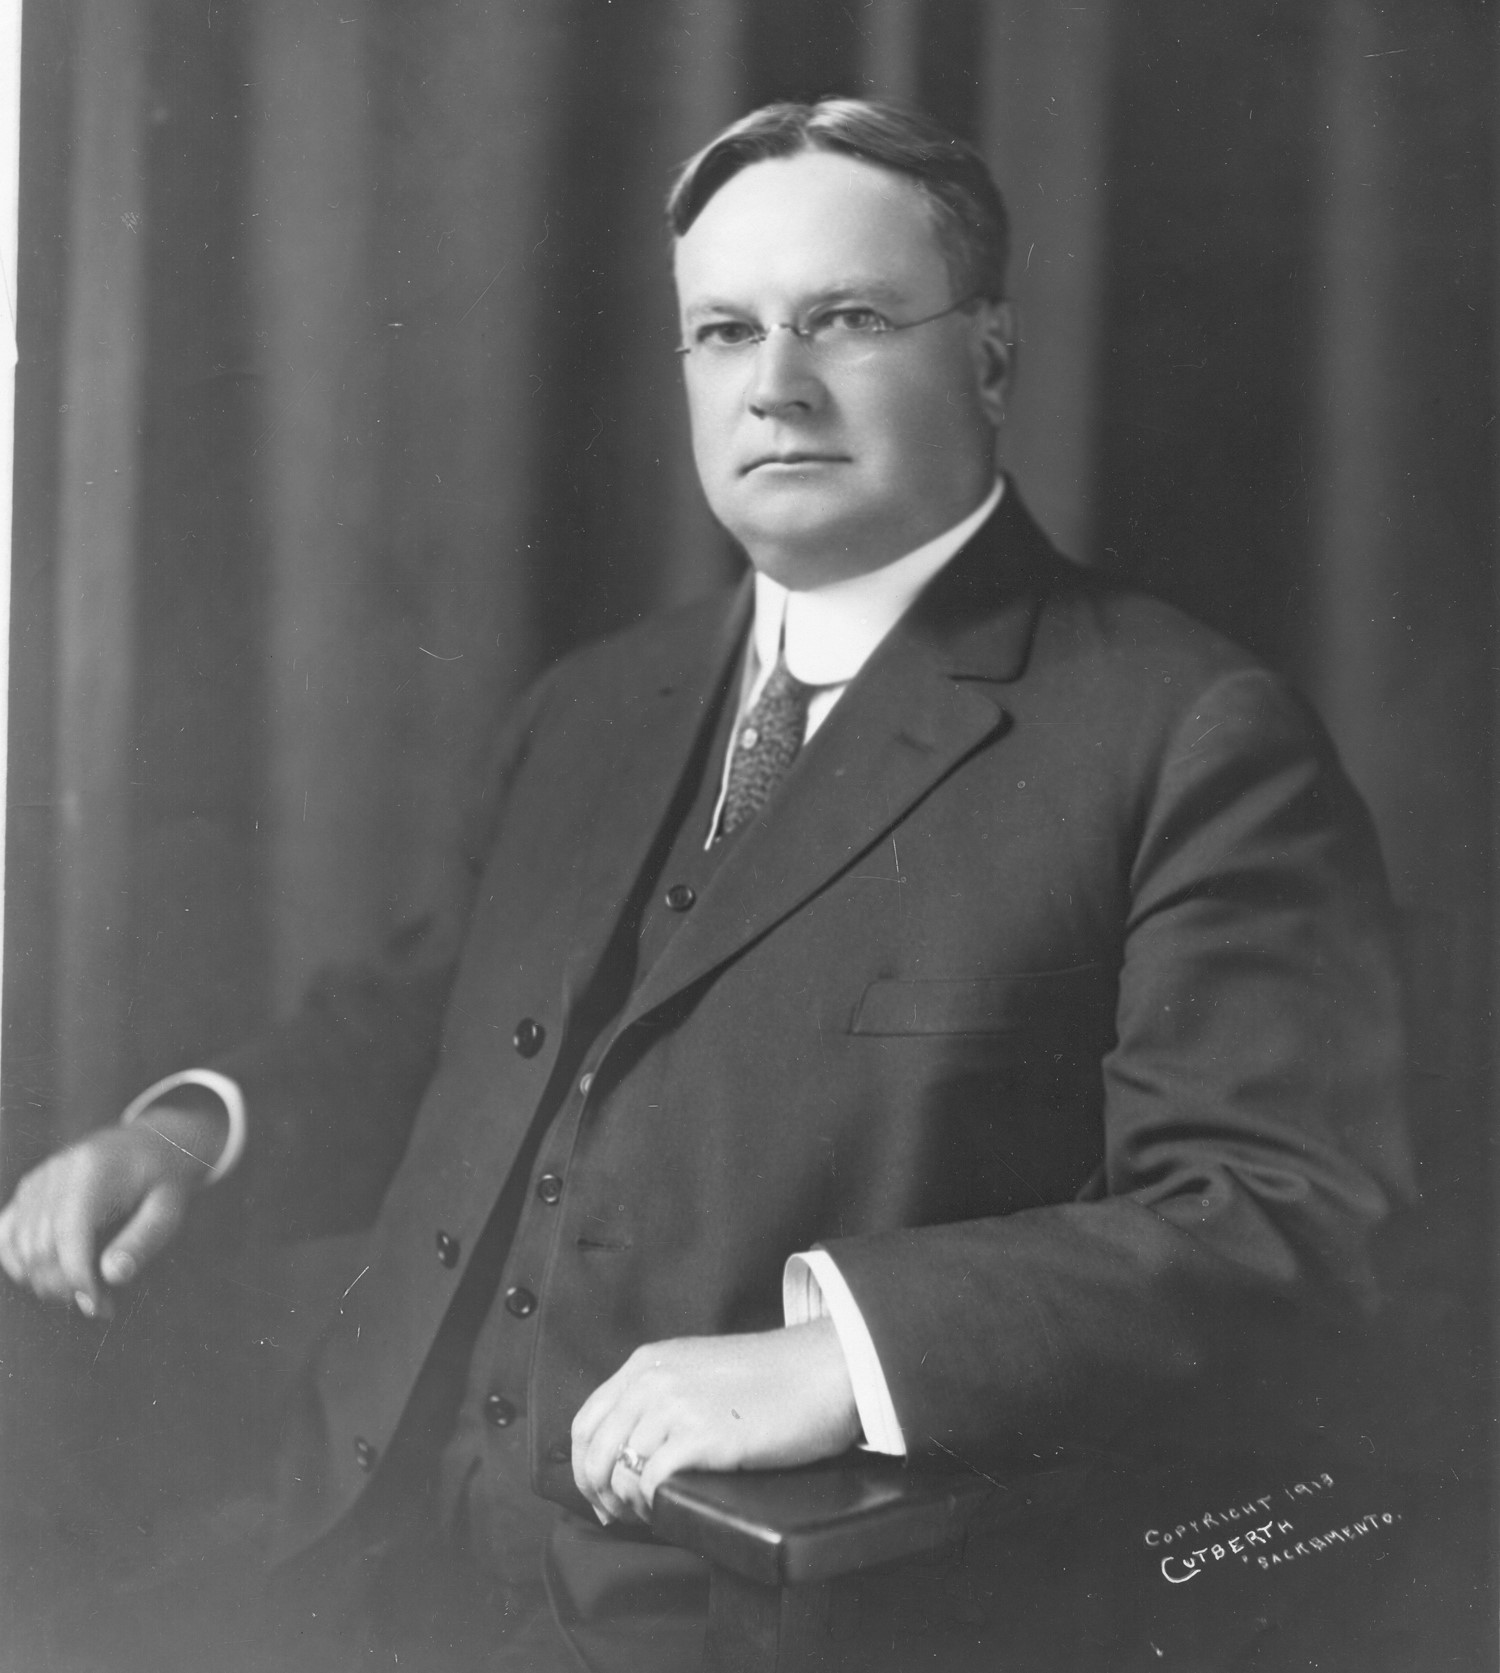 Hiram Johnson sits in a chair with a two-piece suit and a stern expression.